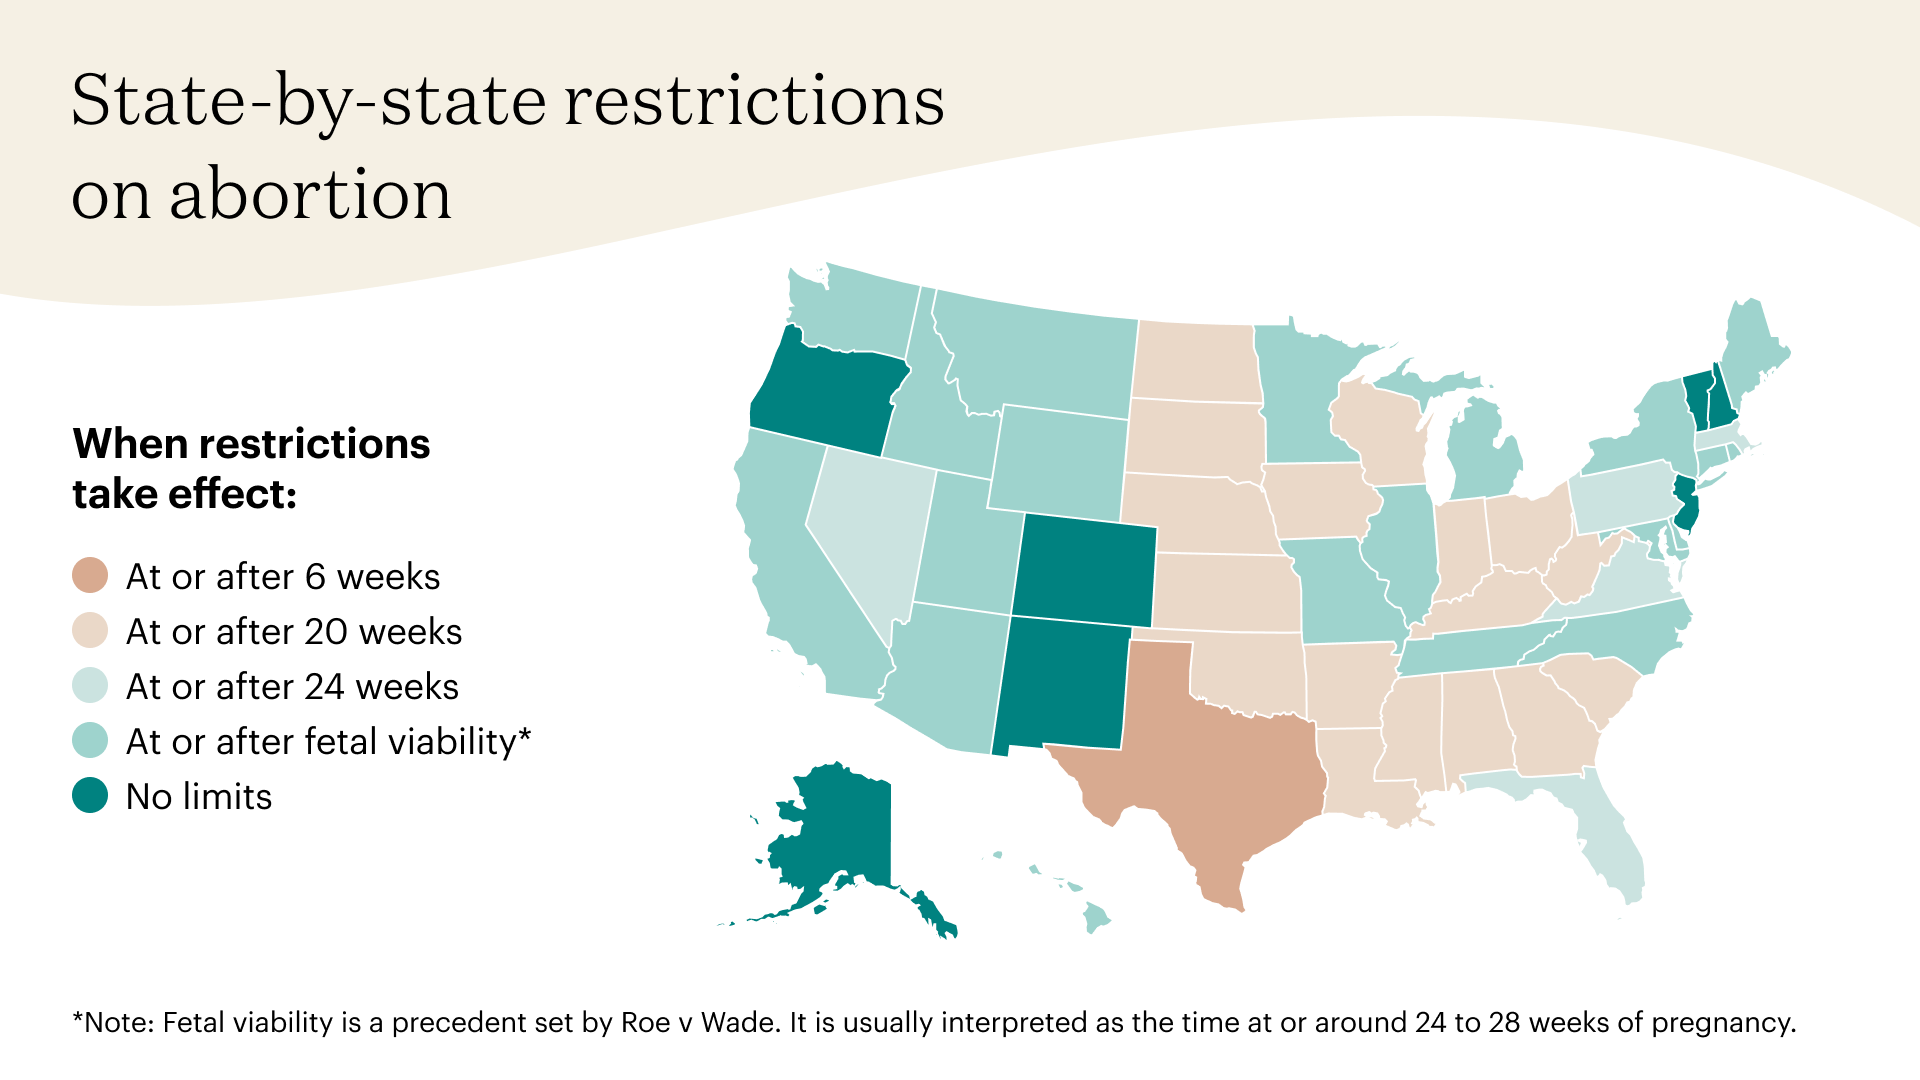 Map of state-by-state restrictions on abortion